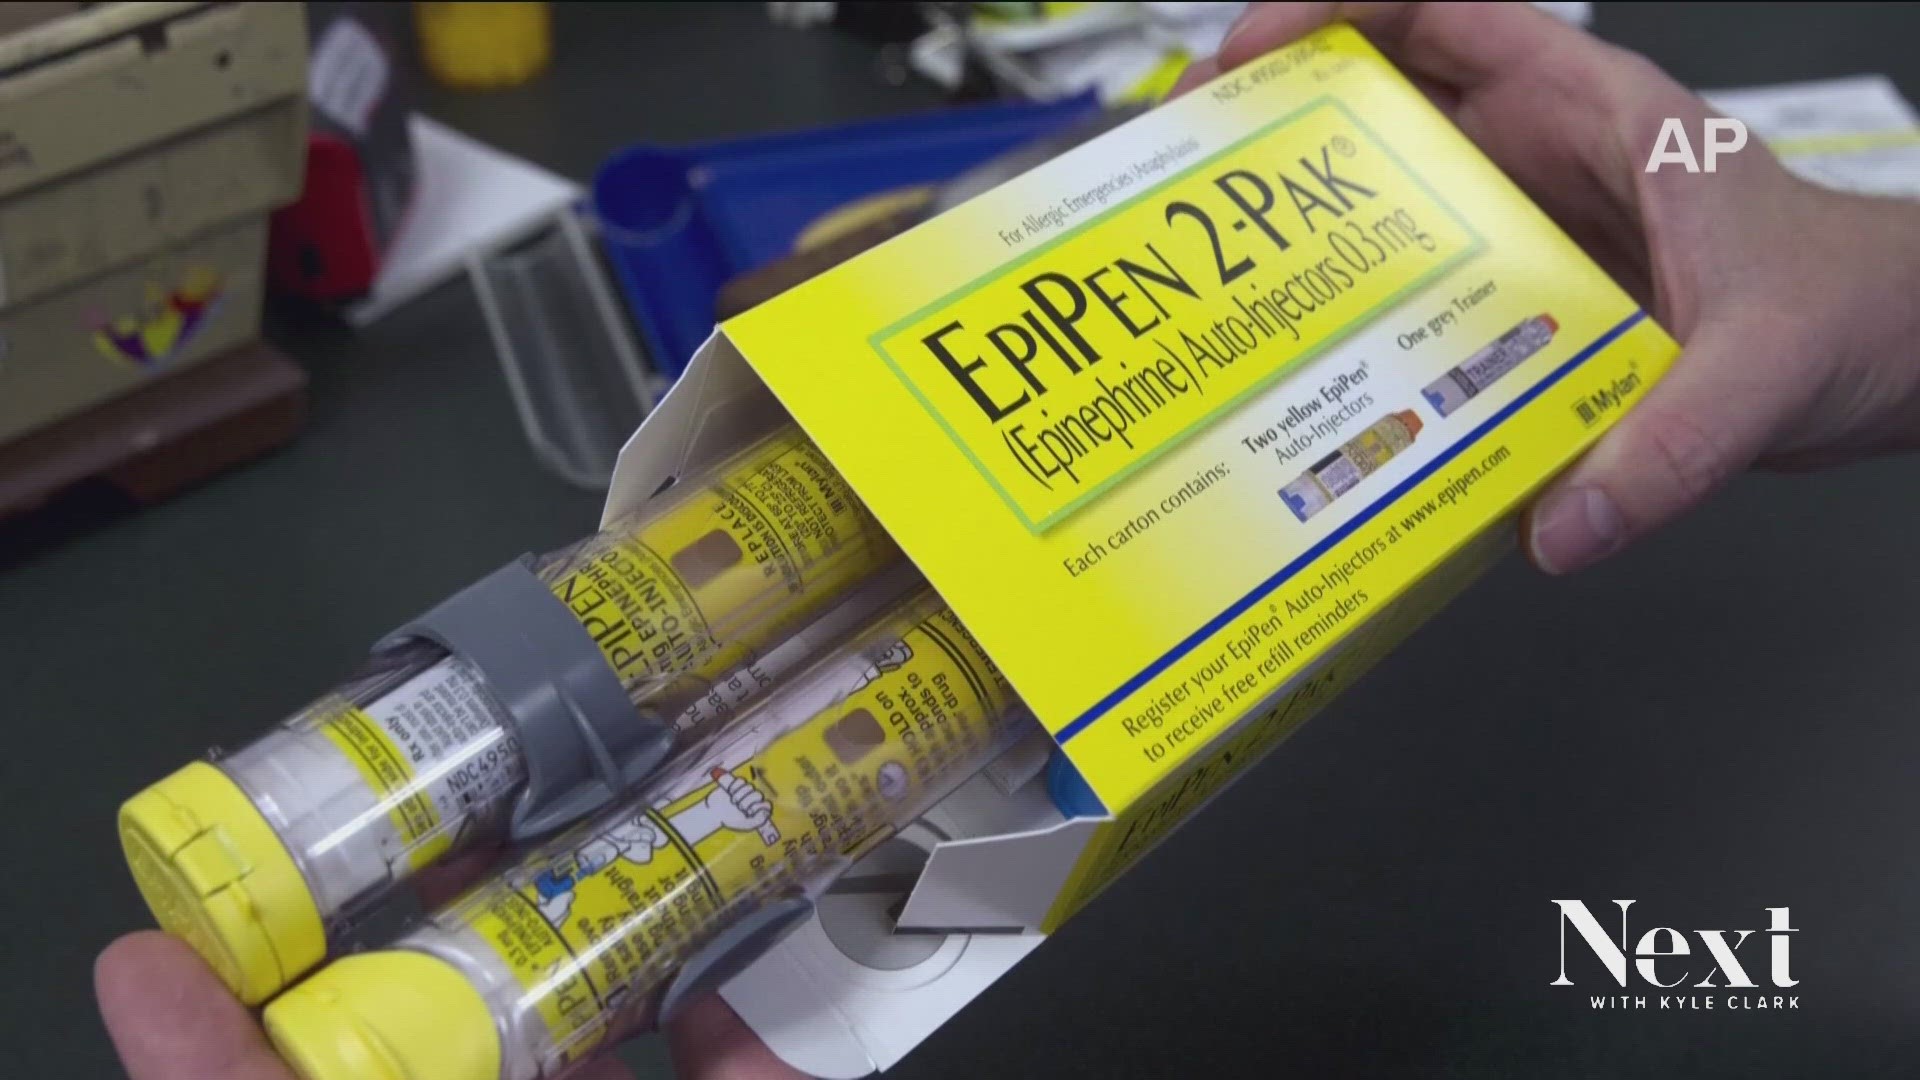 The law is supposed to cap the costs for EpiPens at $60. Pharmacists say they aren't getting the reimbursements from the manufacturer.